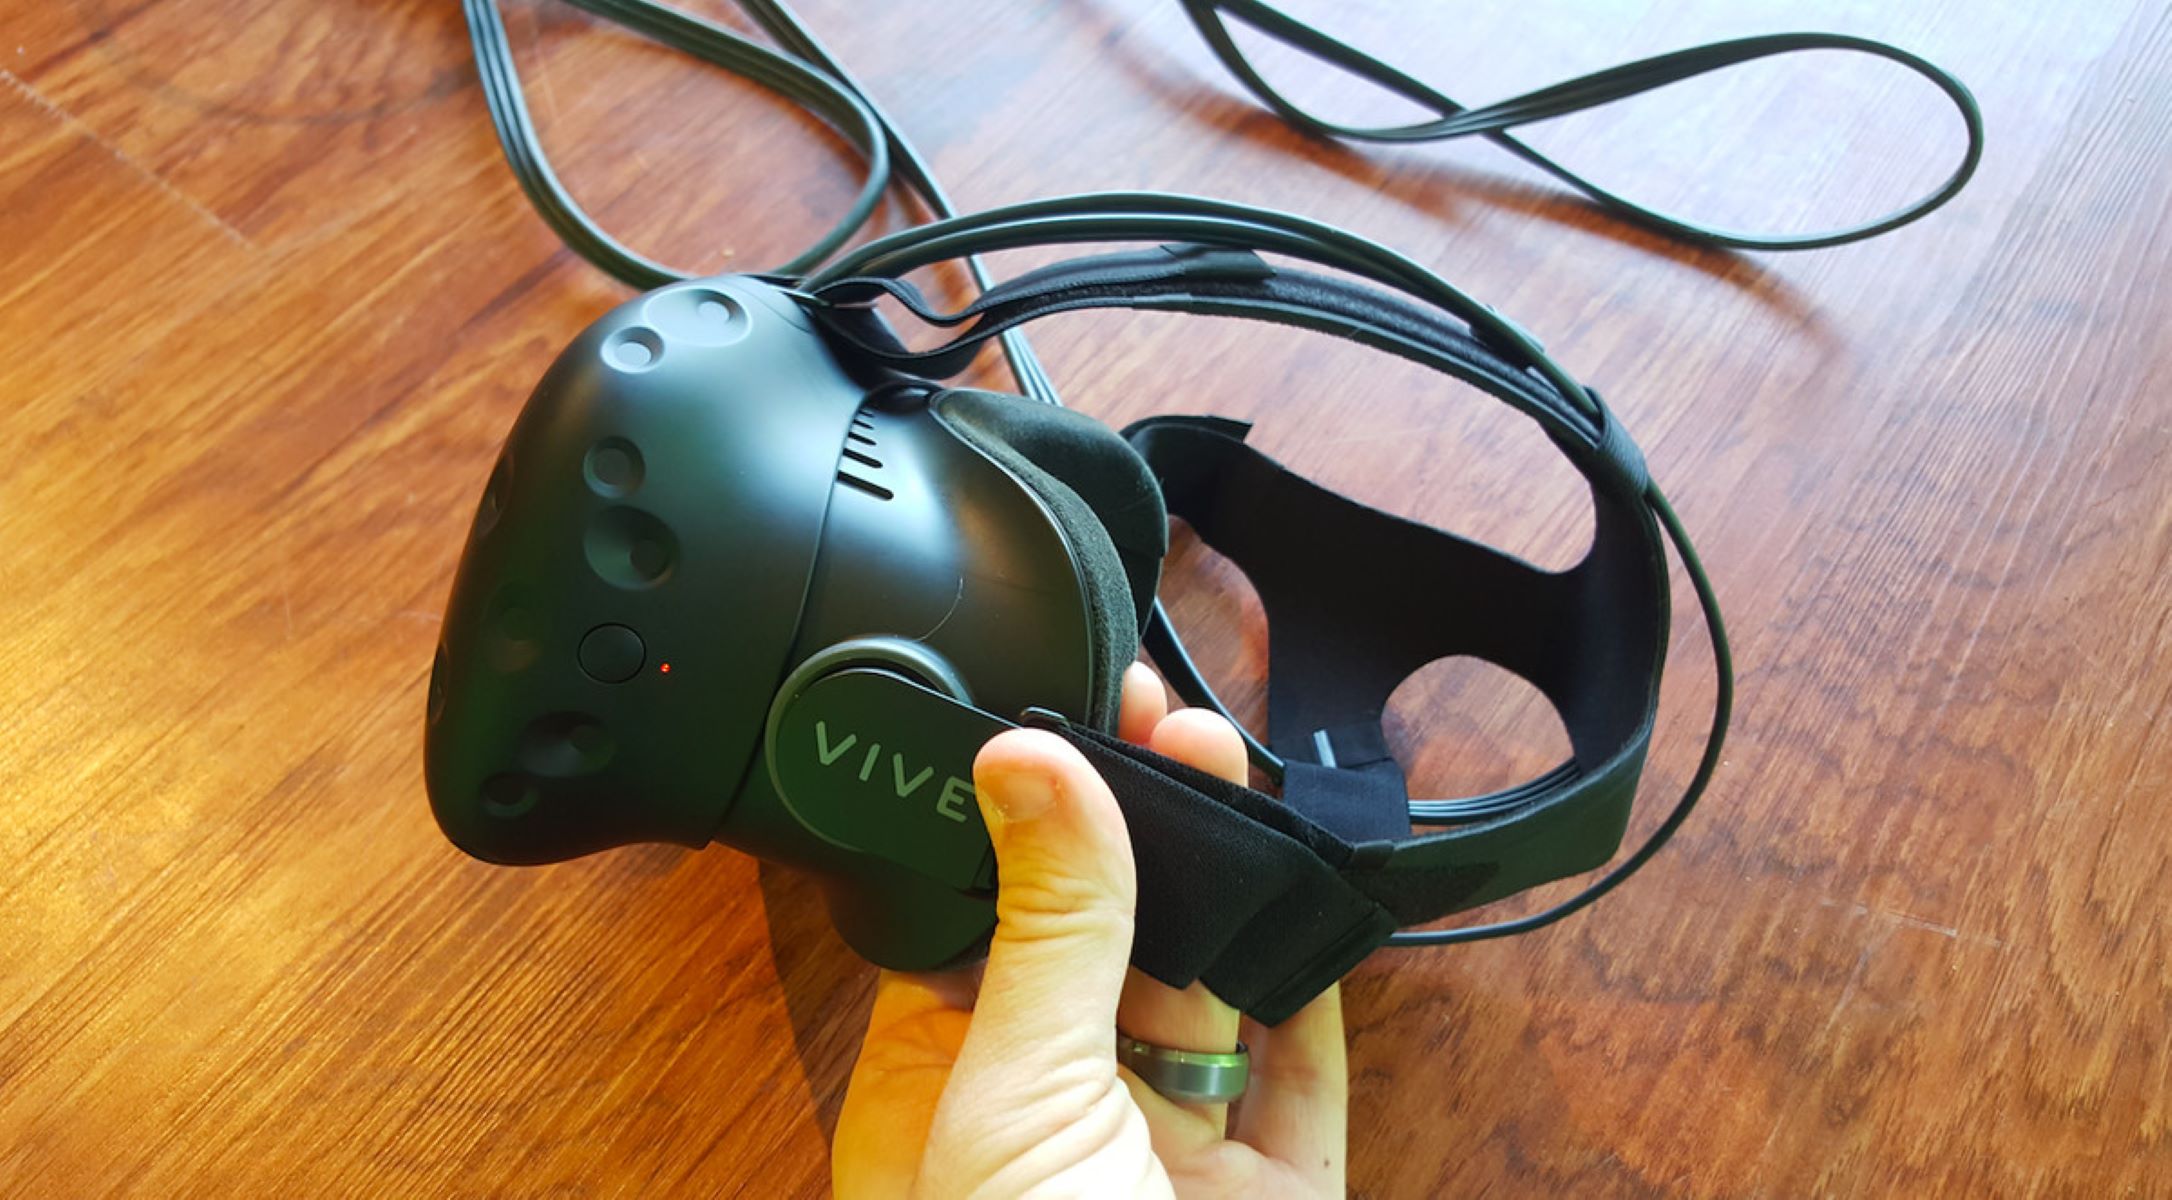 What Cords Do You Need For An HTC Vive